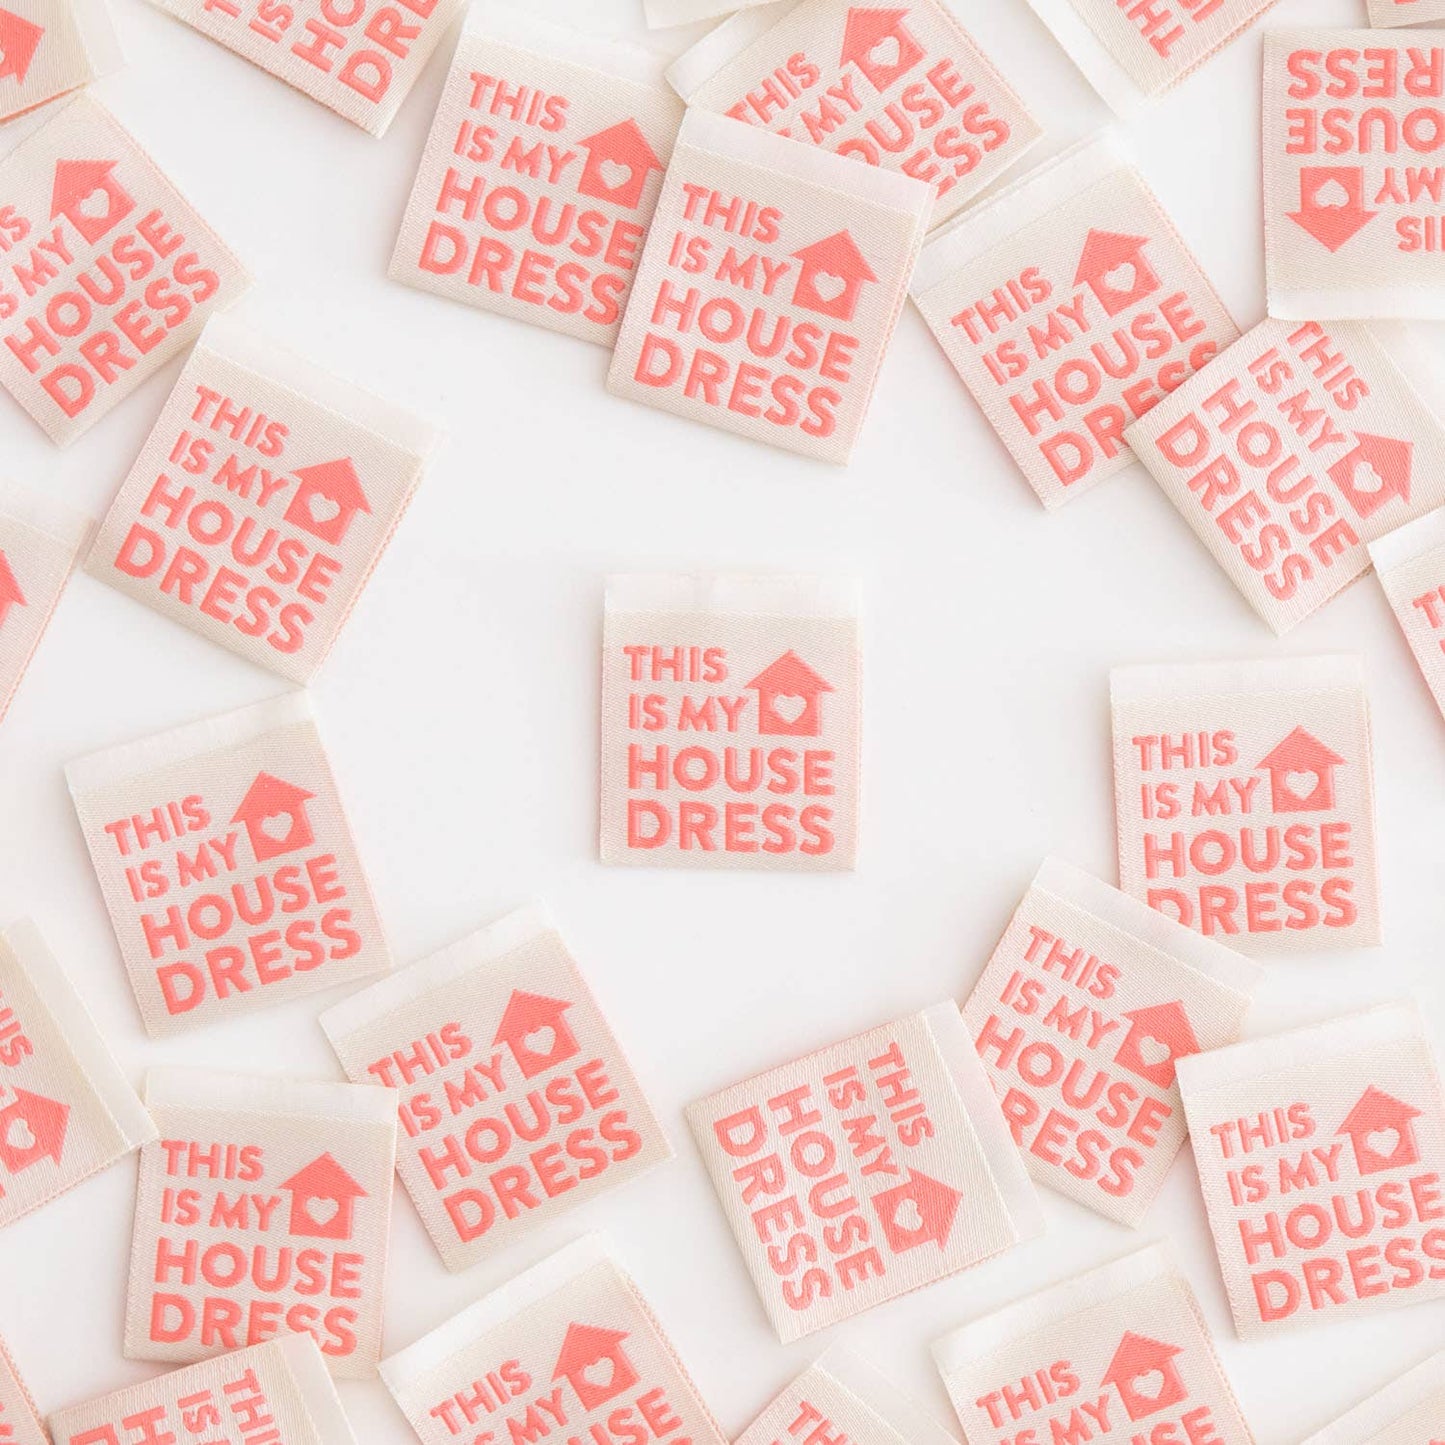 This Is My House Dress Woven Labels - Sewing Woven Clothing - homesewn